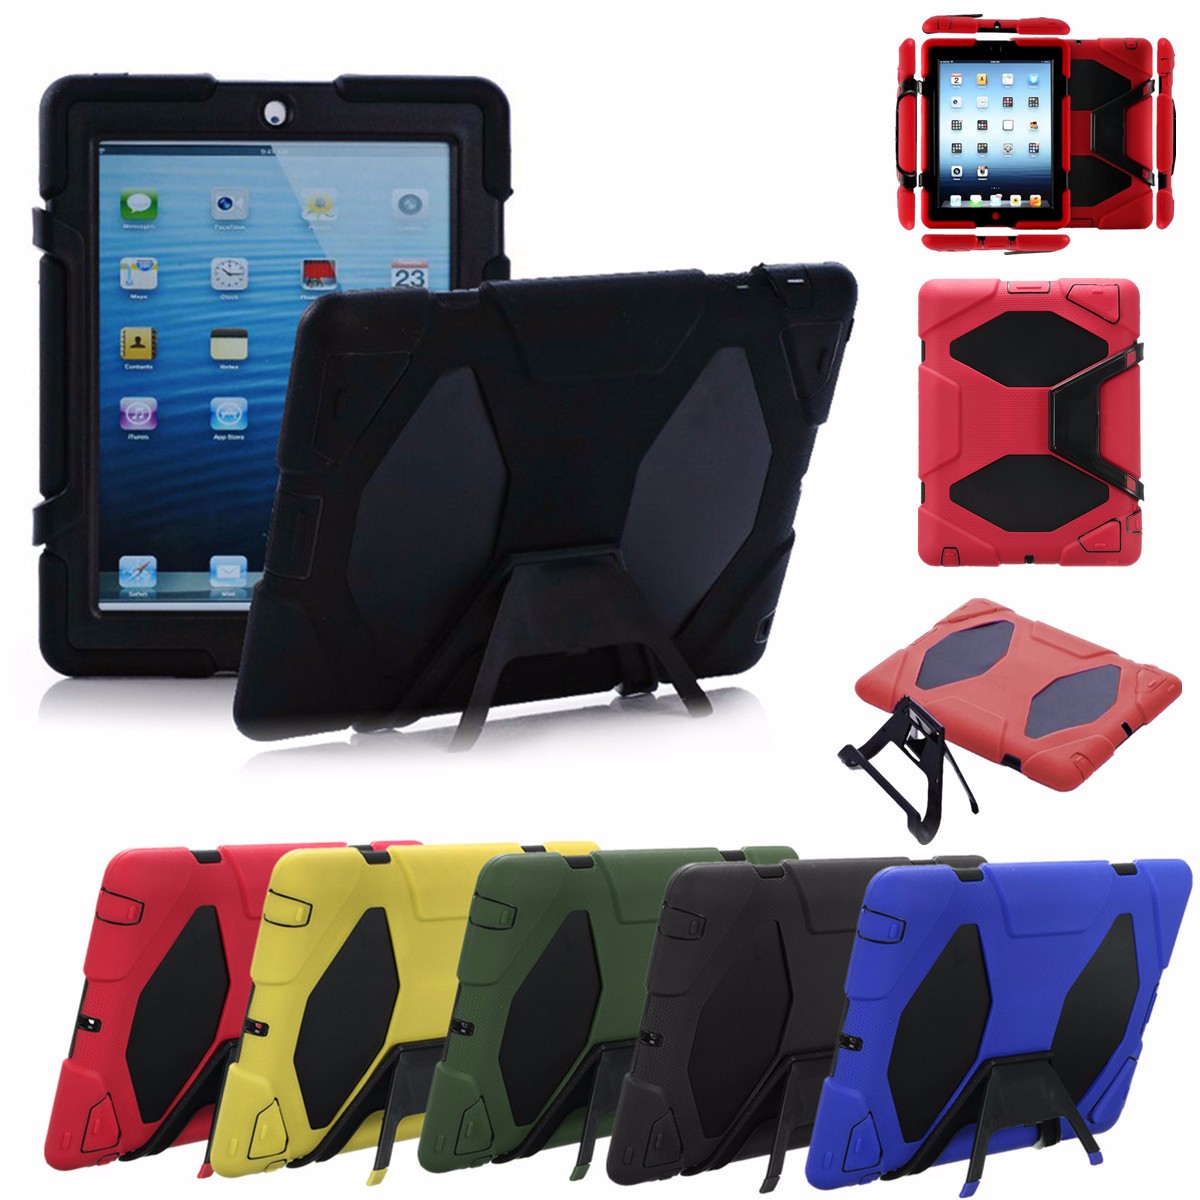 

Shockproof Heavy Duty Hard Case Cover With Stand For Apple iPad 2 3 4